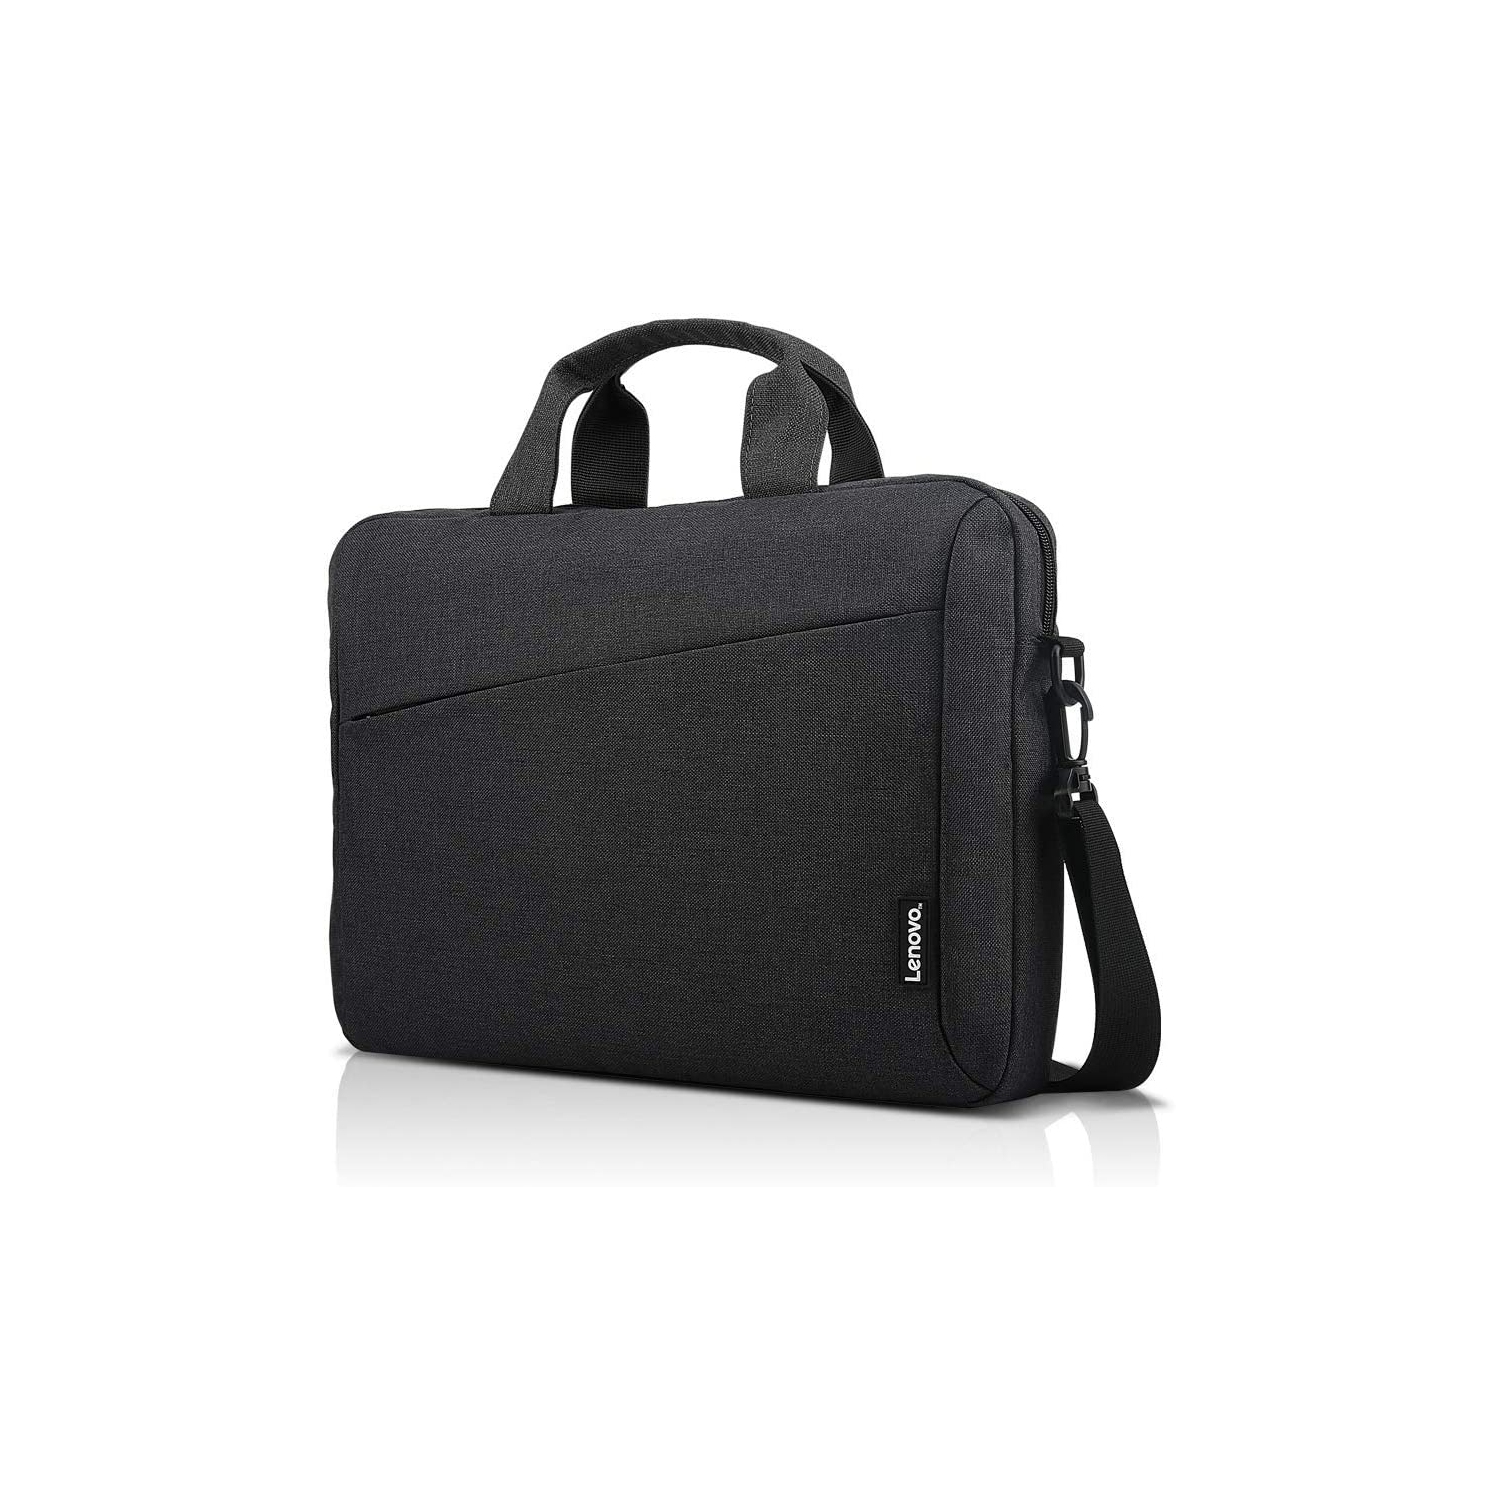 Lenovo Laptop Carrying Case T210, fits for 15.6-Inch Laptop/ Tablet, Sleek Design and Water-Repellent Fabric,